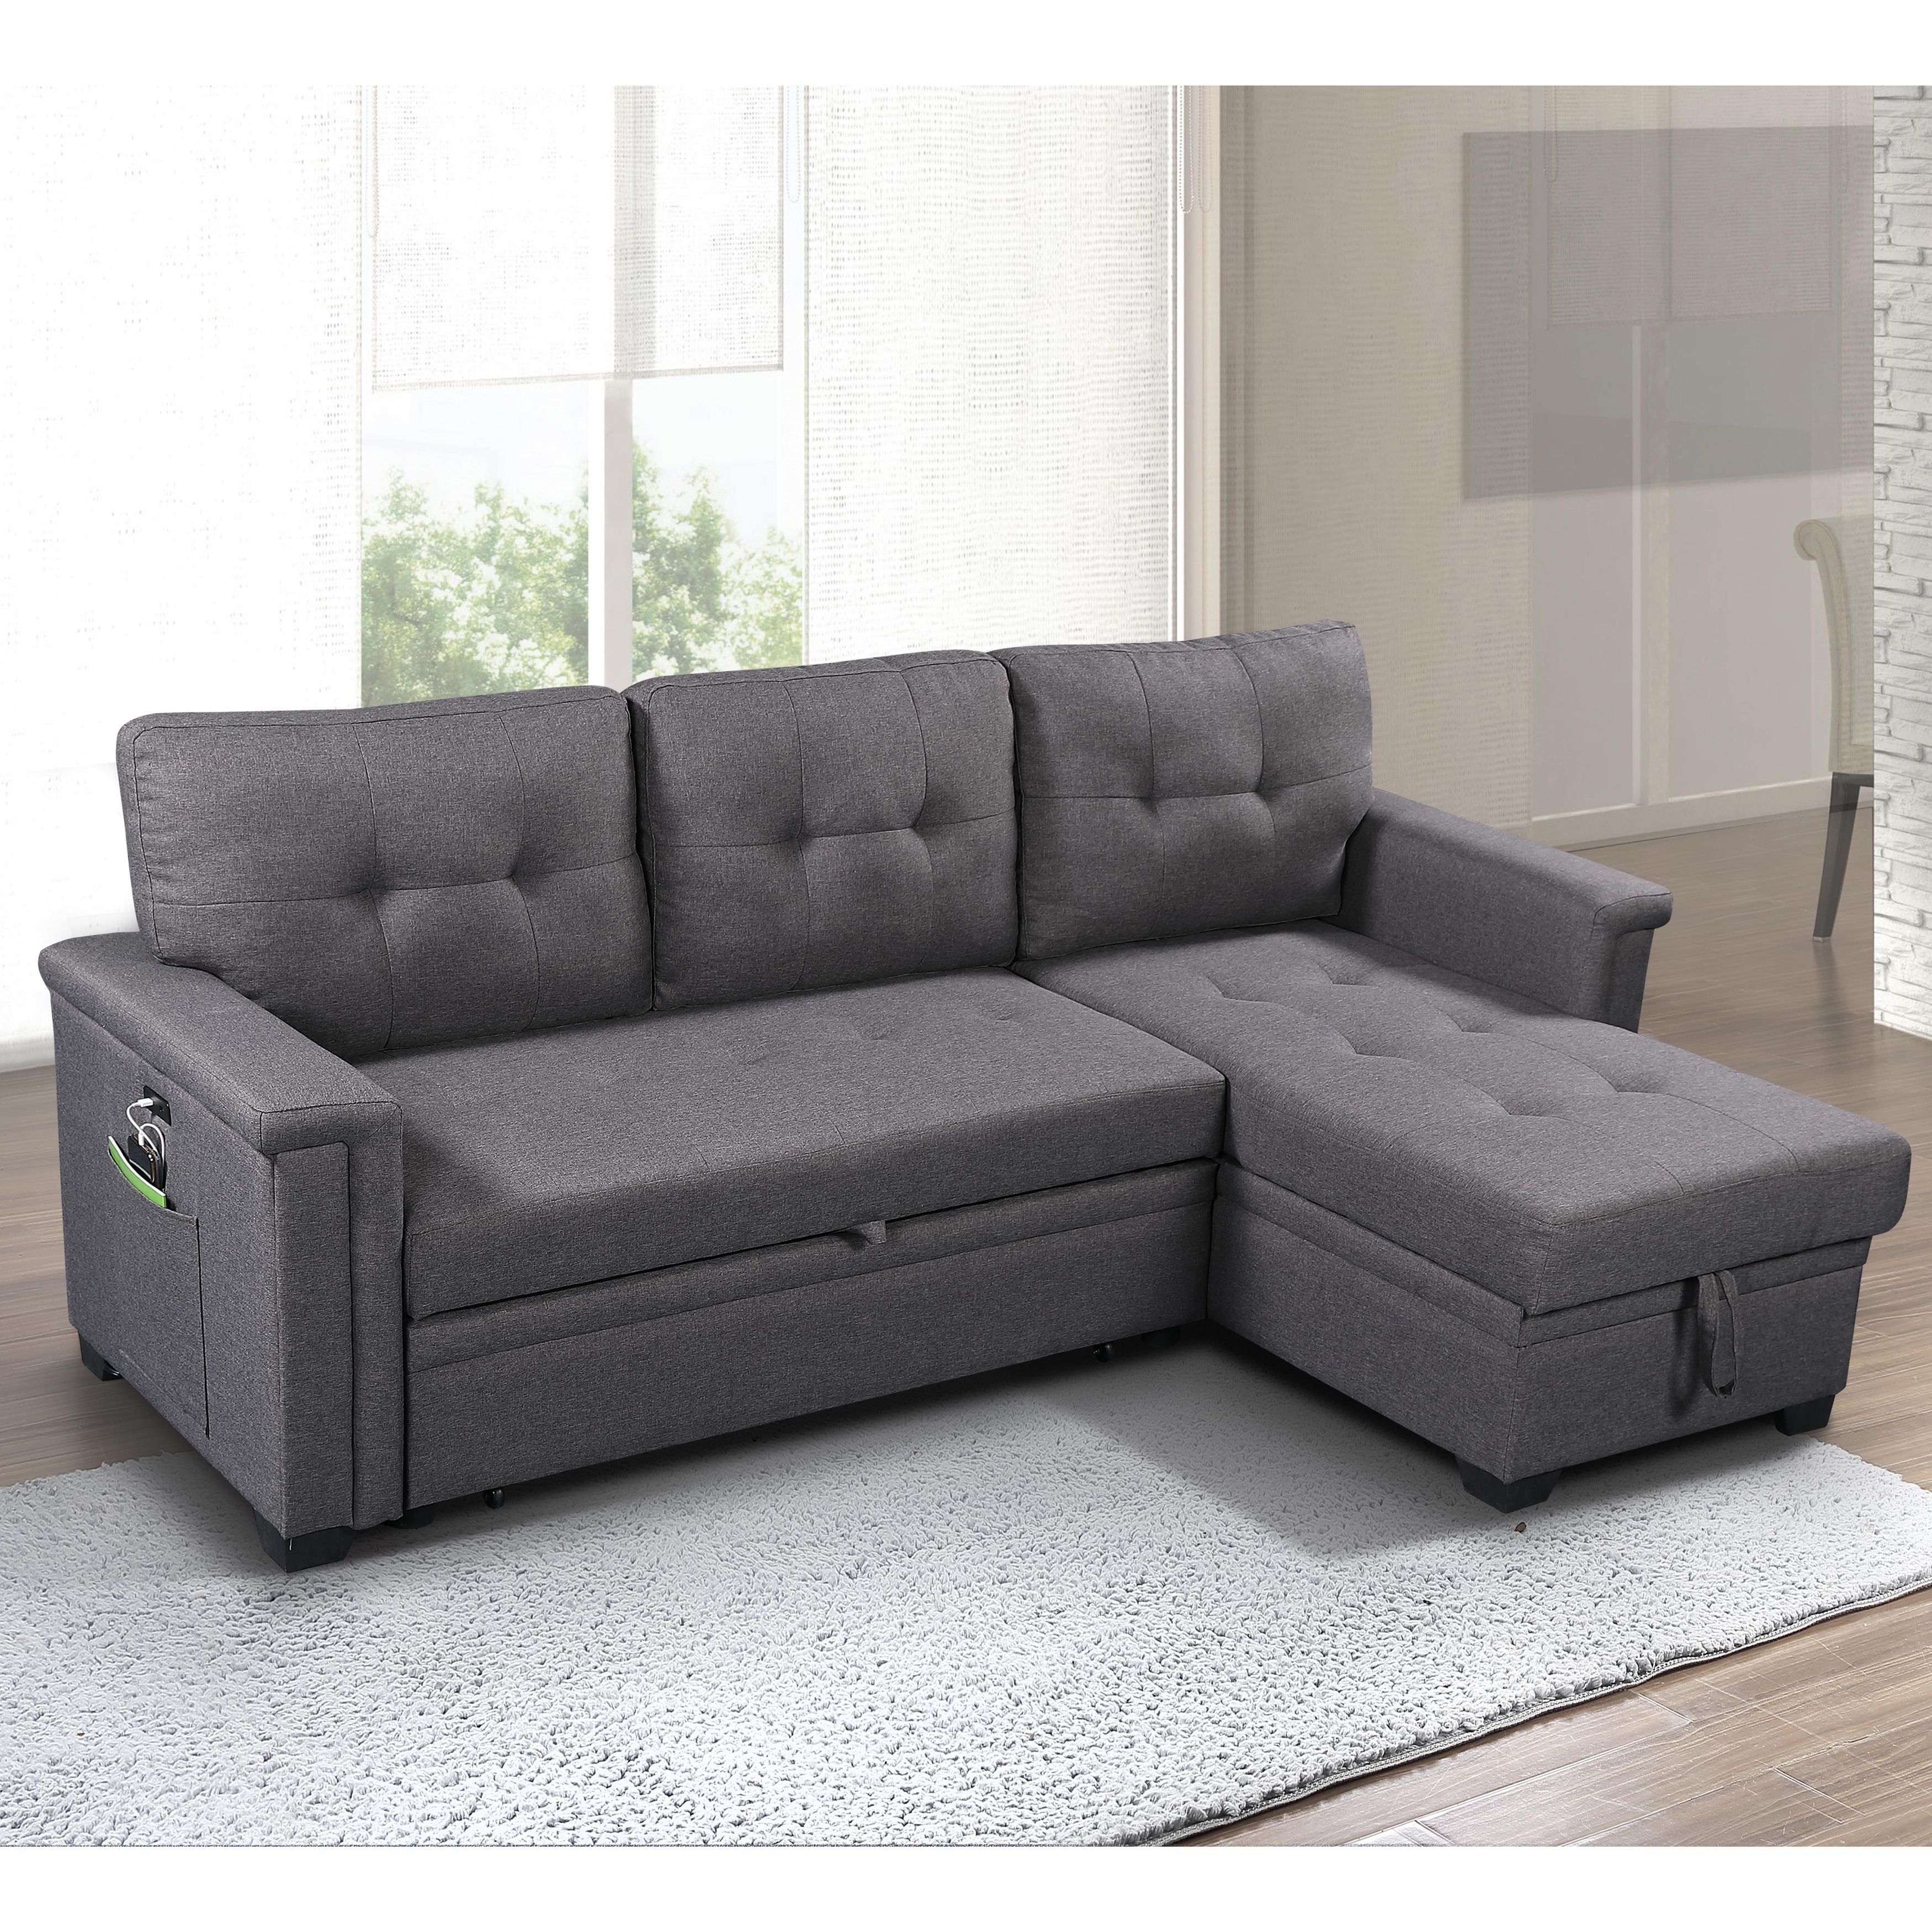 Ashlyn Reversible Sleeper Sofa With Storage Chaise – – 30144937 Pertaining To Convertible Sofa With Matching Chaise (Gallery 2 of 20)